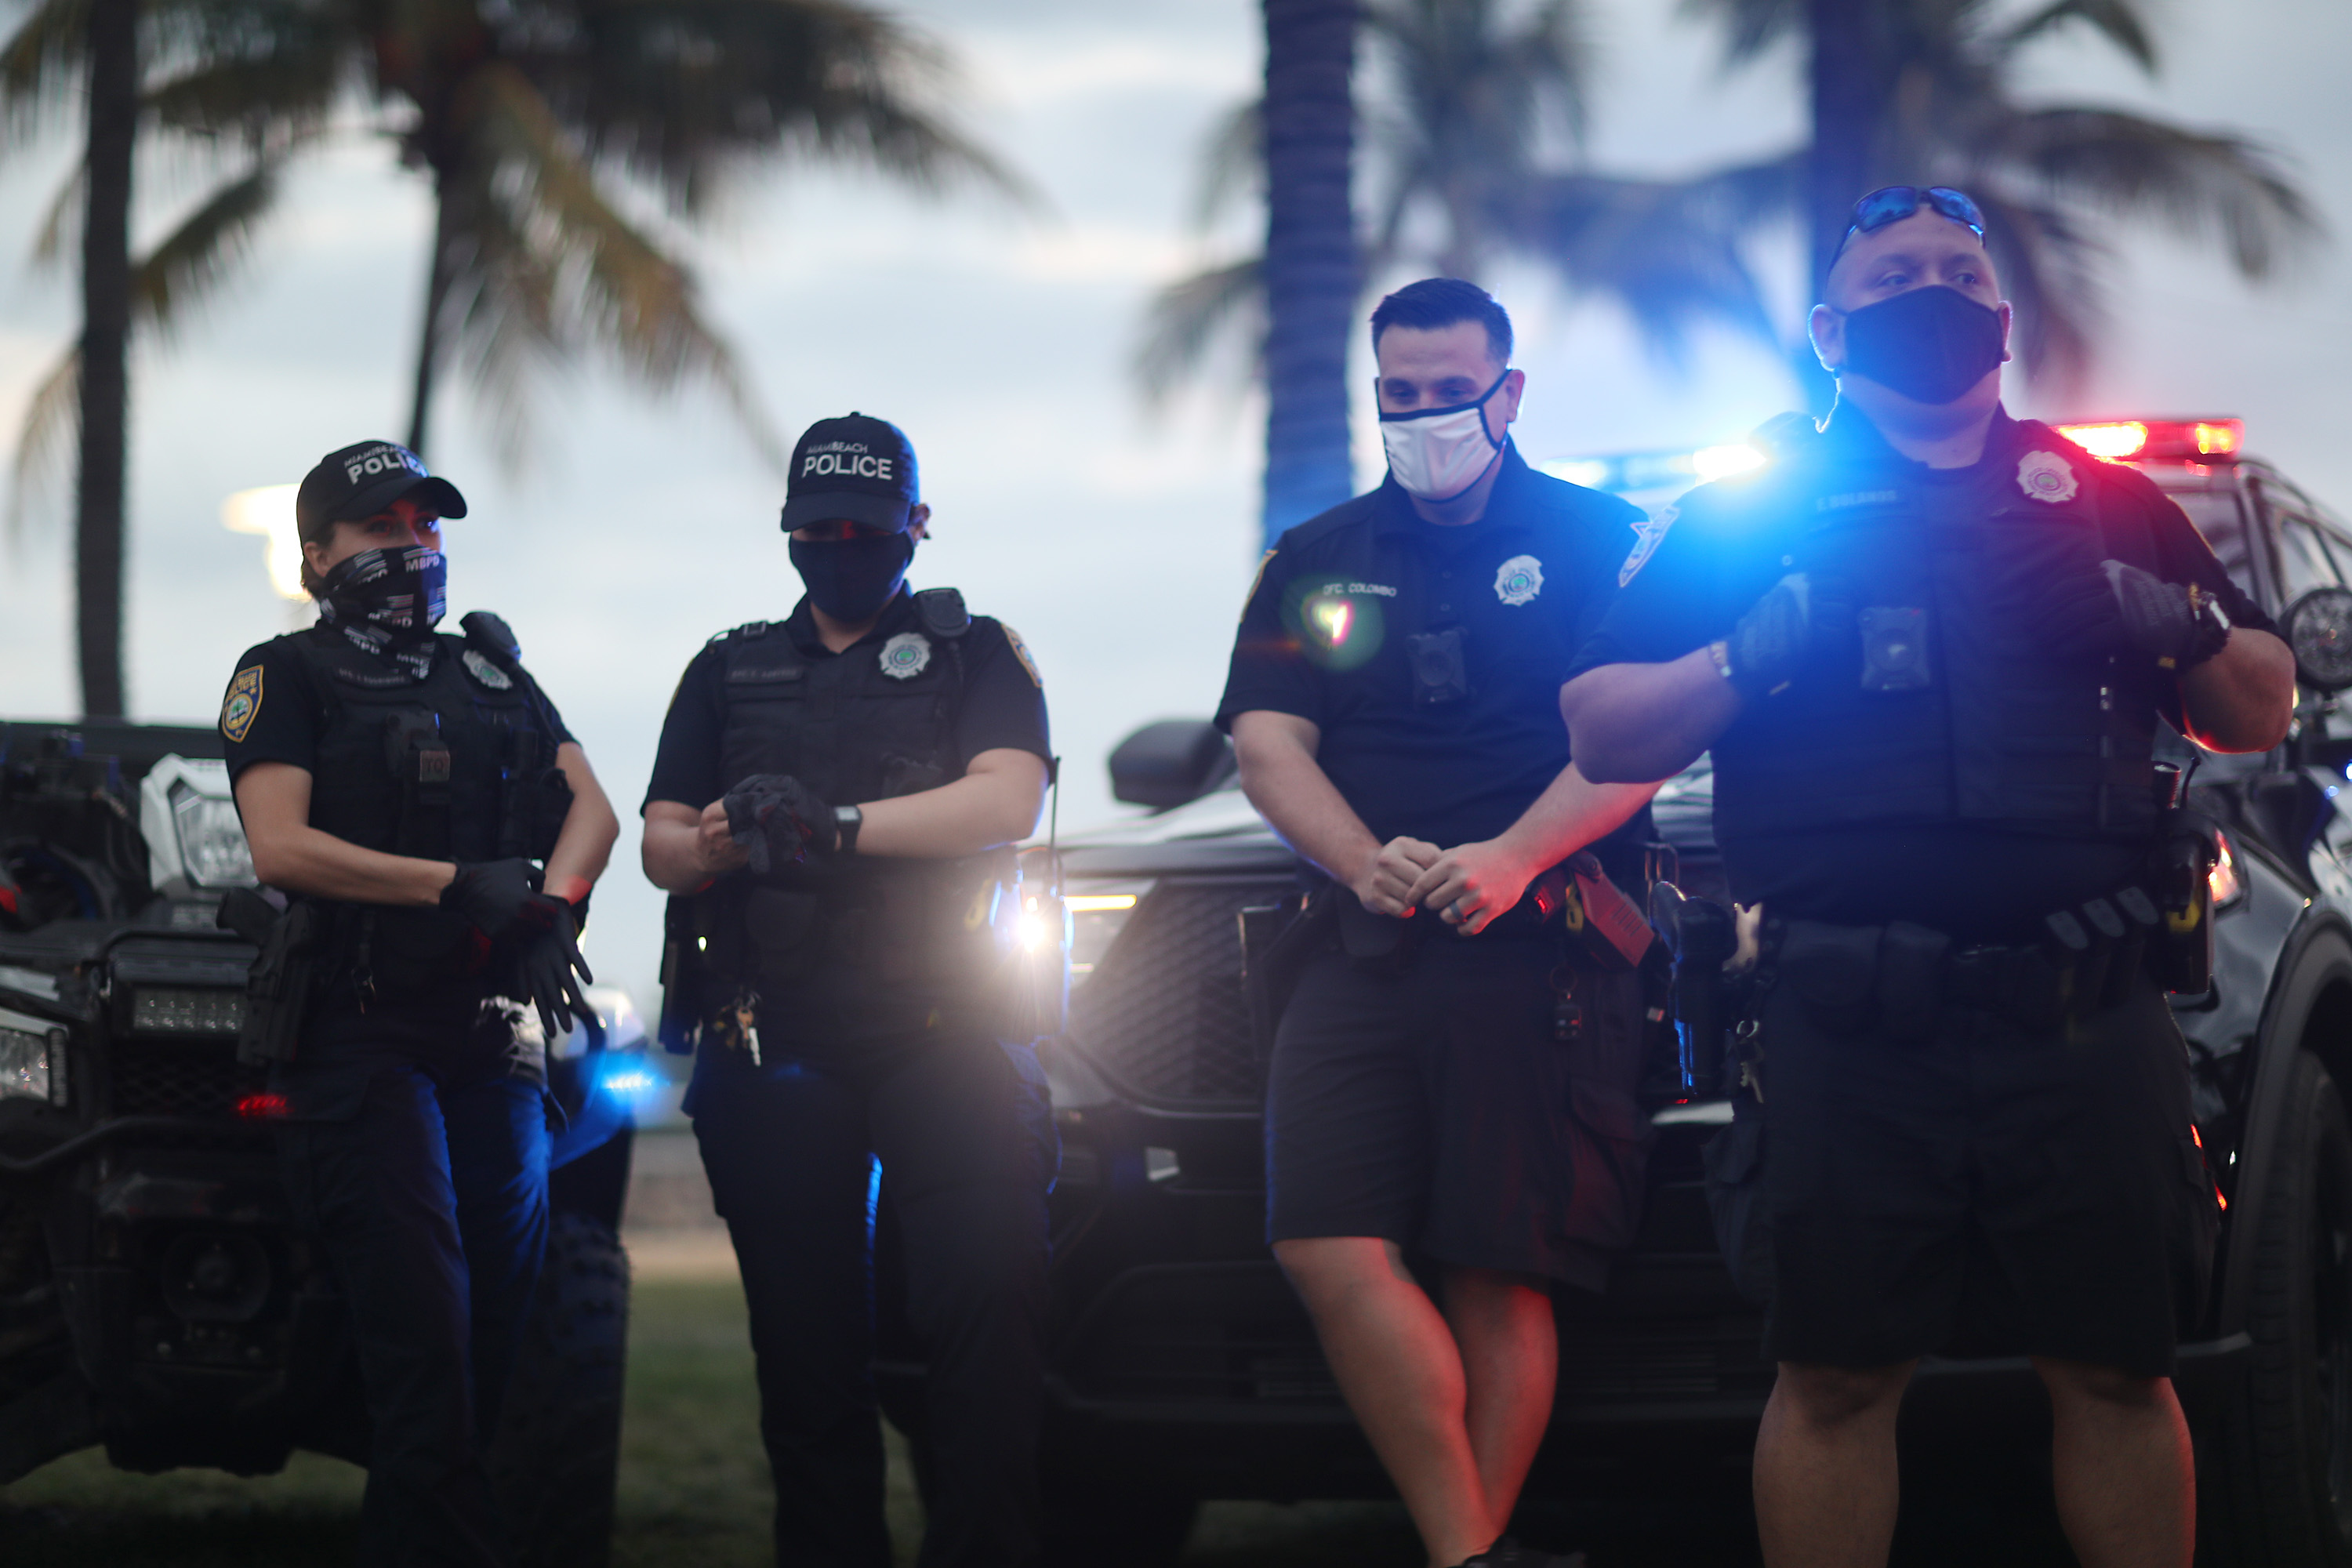 Four officers, two women and two men, stand in front of police cars with flashing lights. All are in navy blue uniforms, and all are wearing masks. 